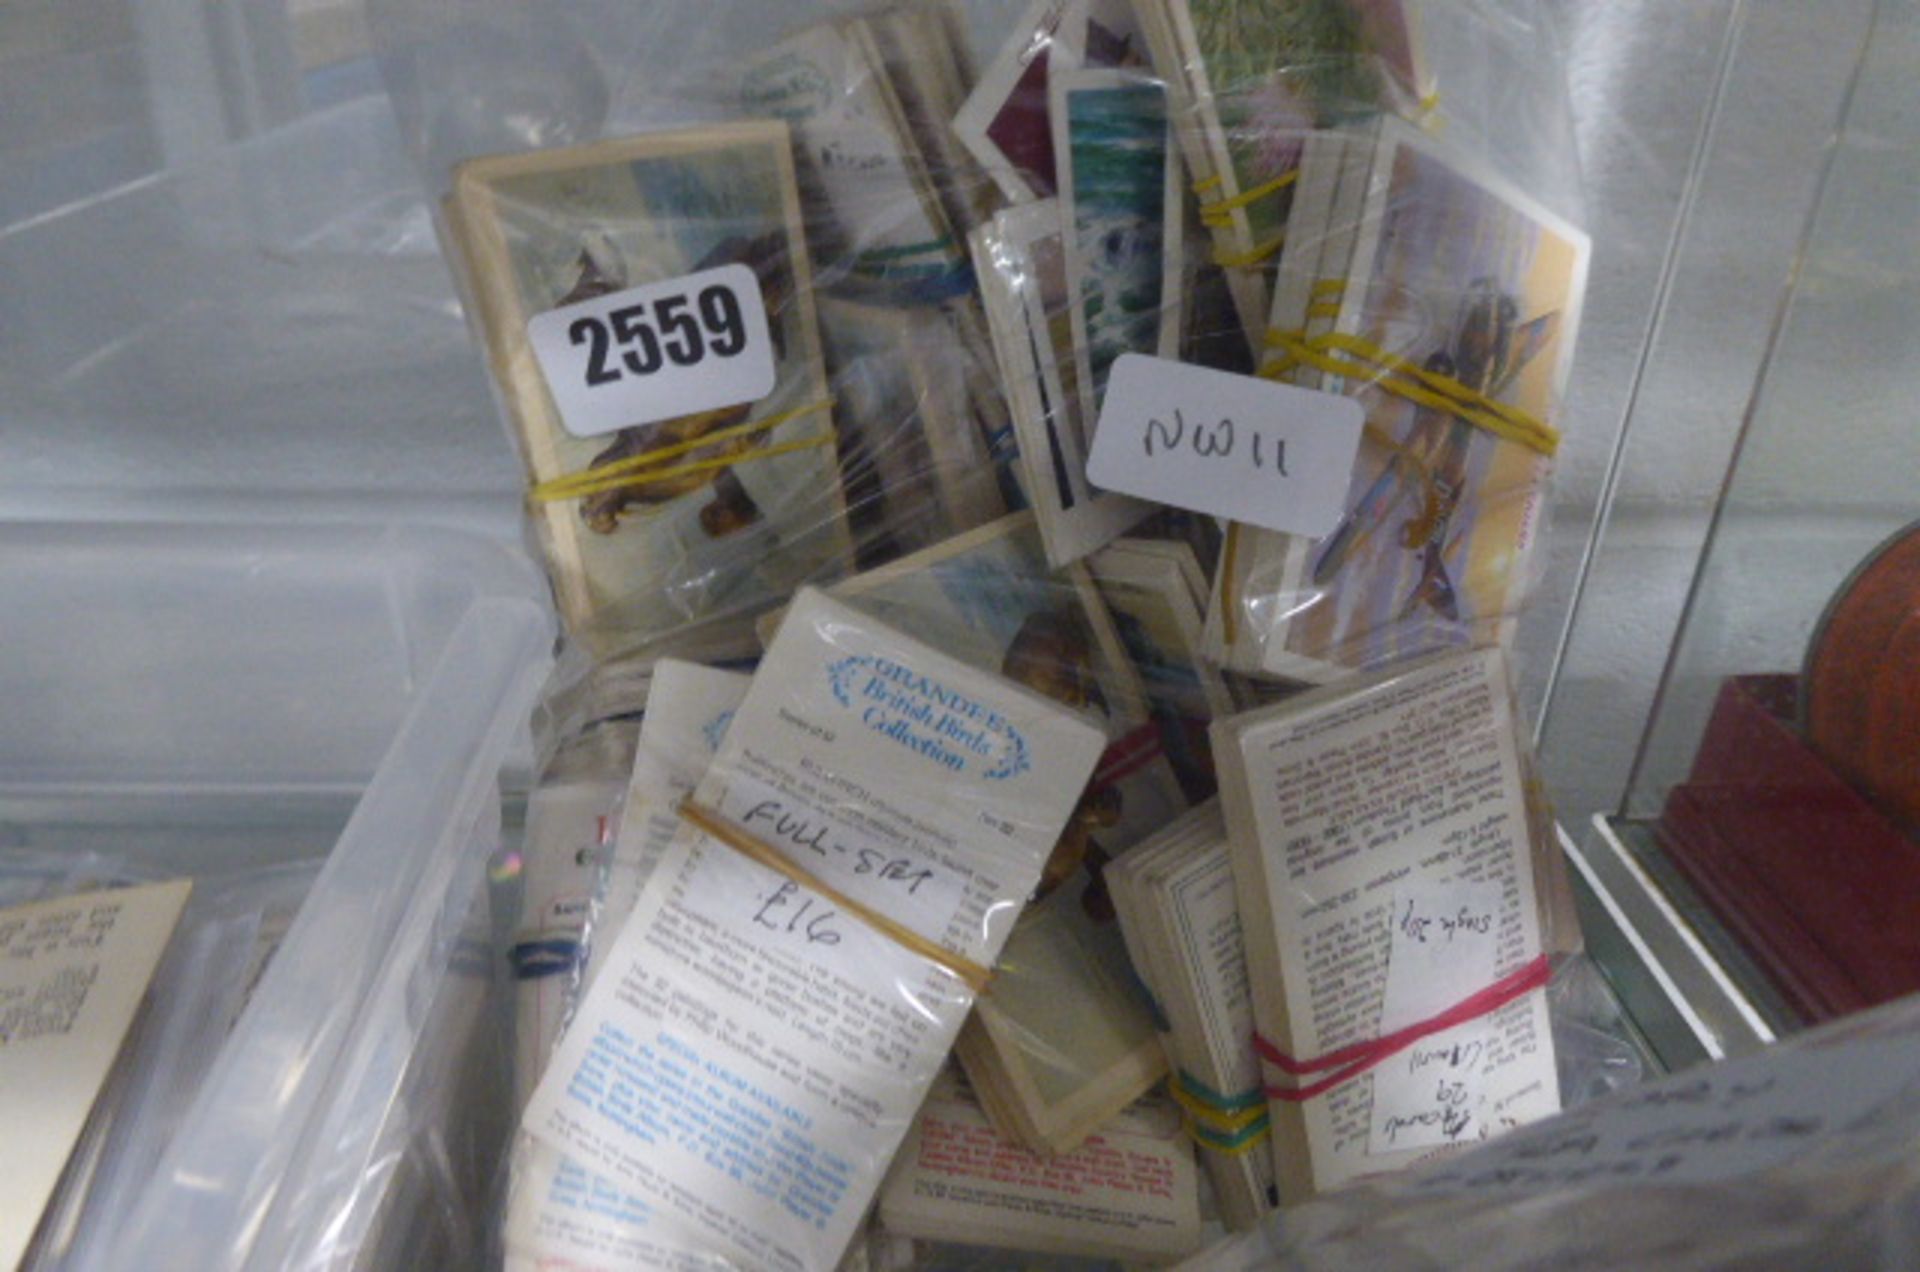 Bag containing cigarette cards, incomplete set